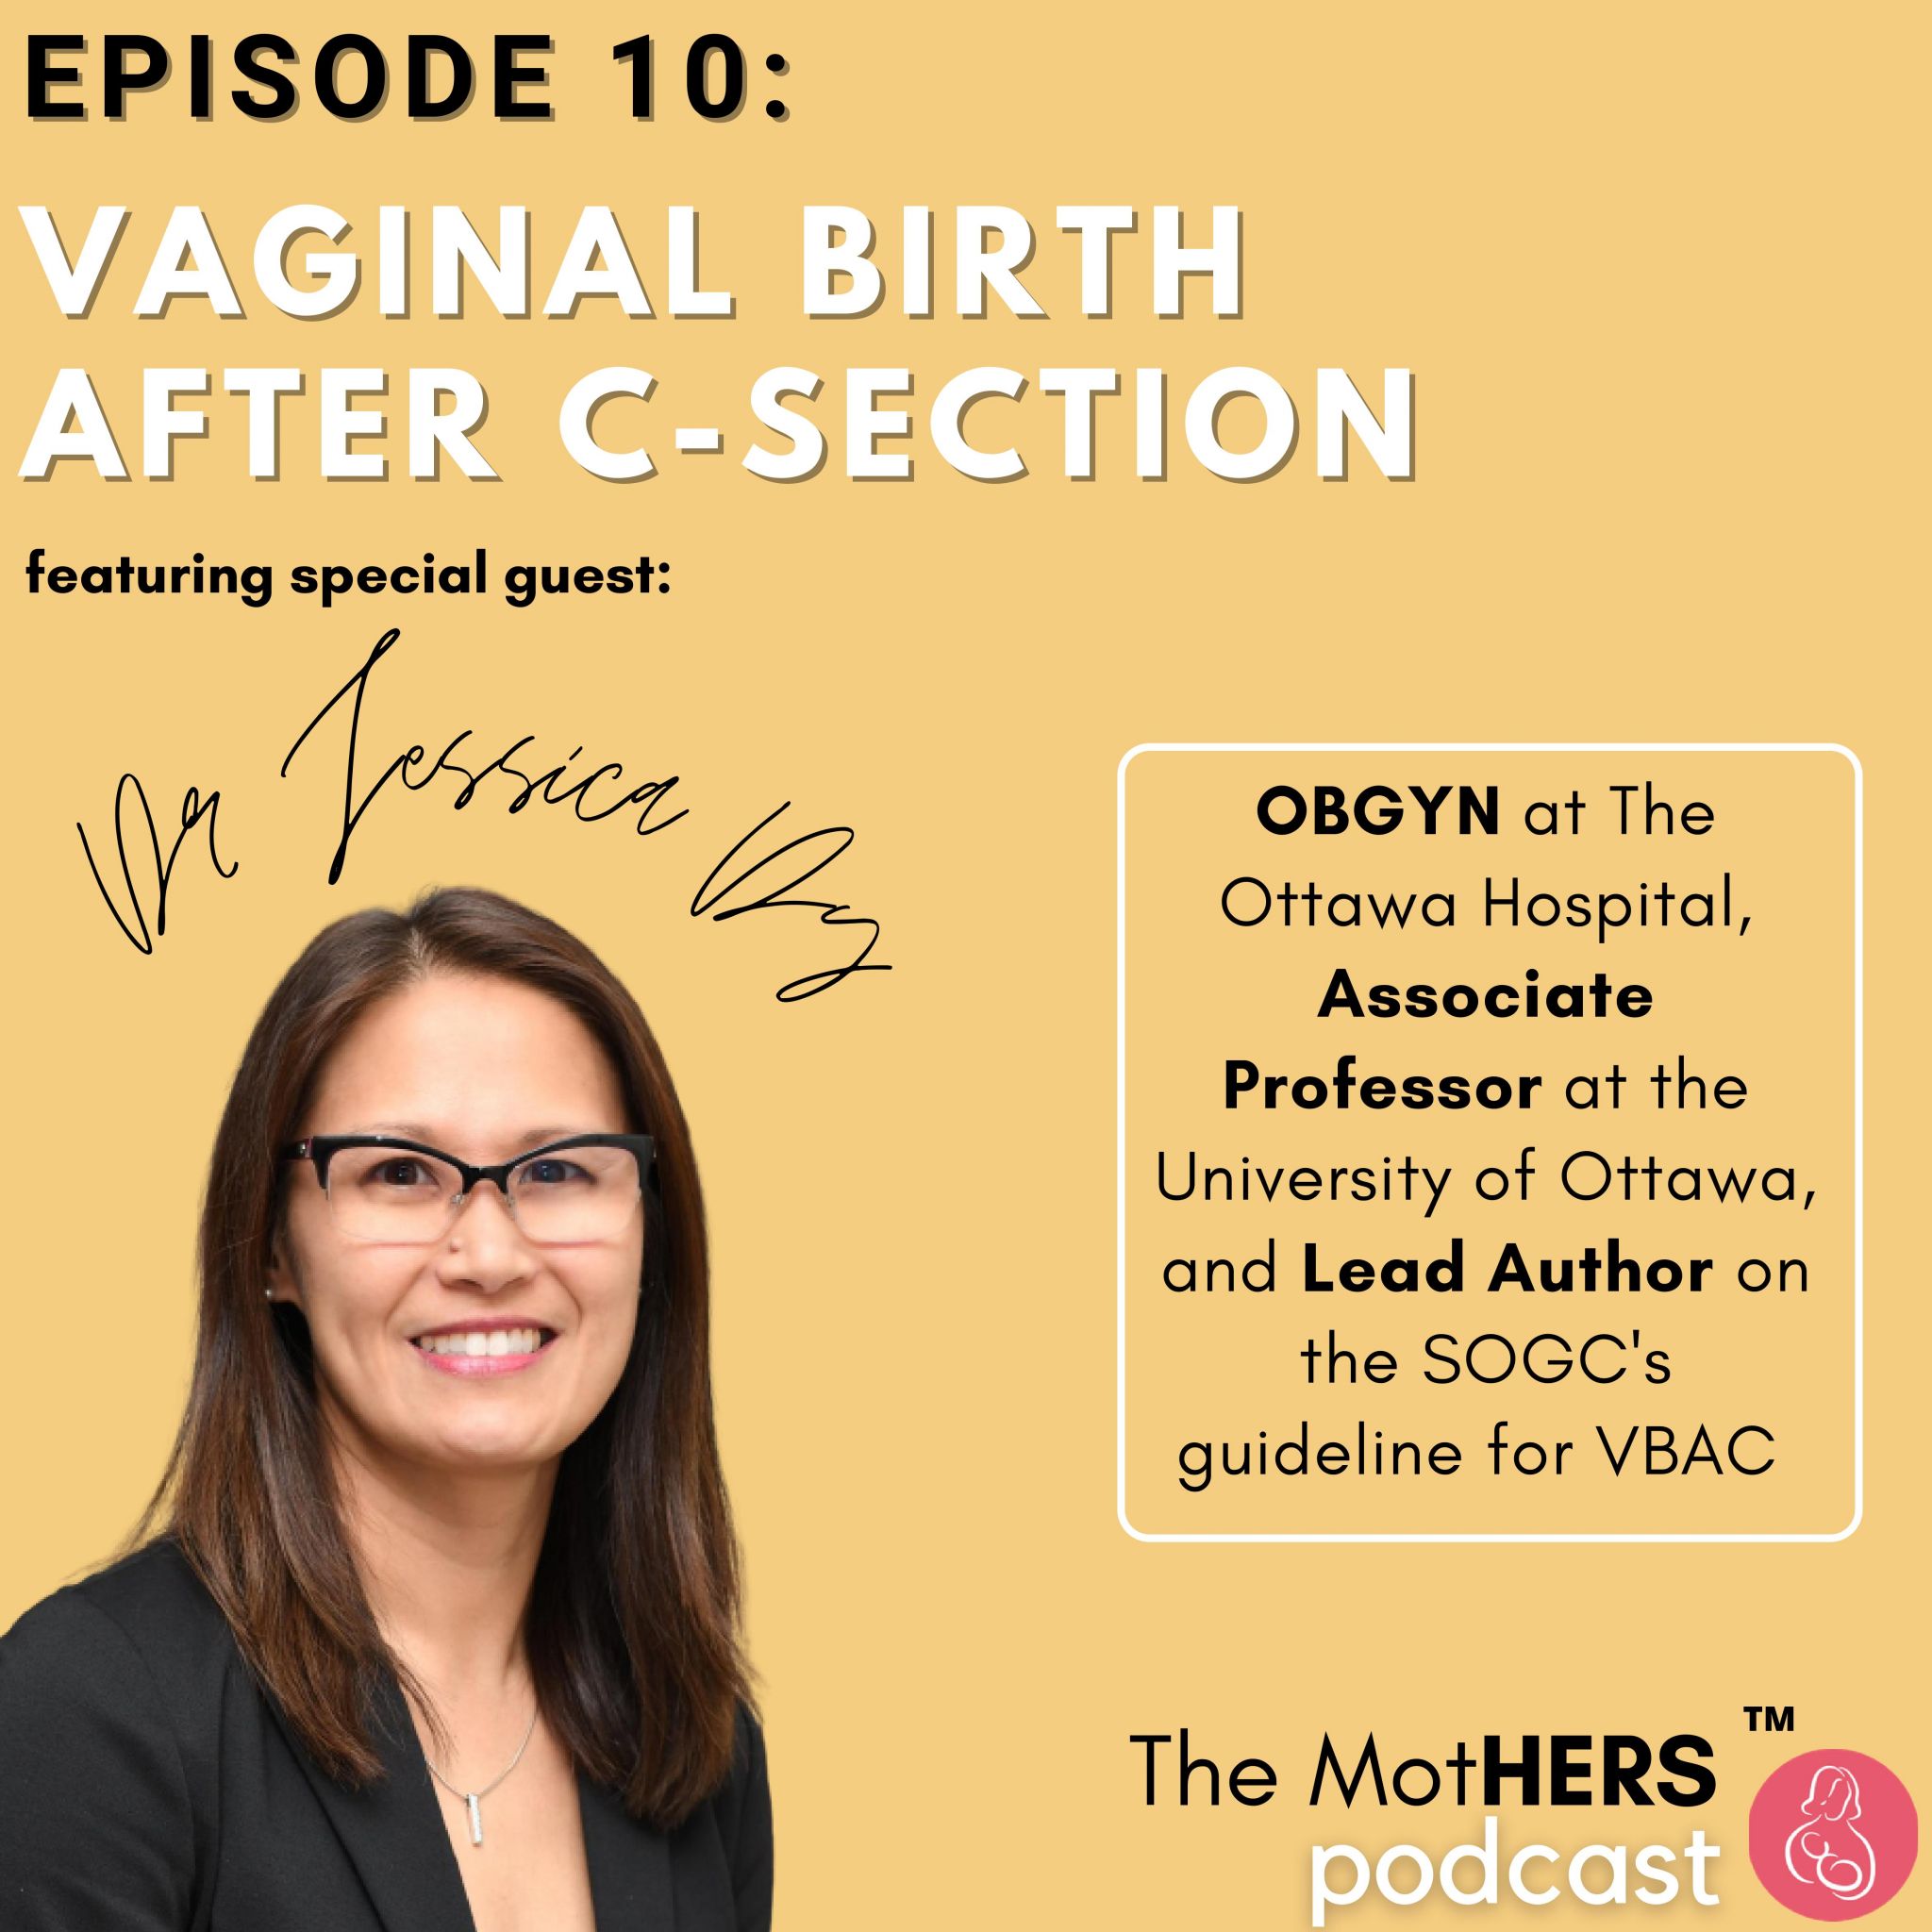 Episode 10 Vaginal Birth after C-Section